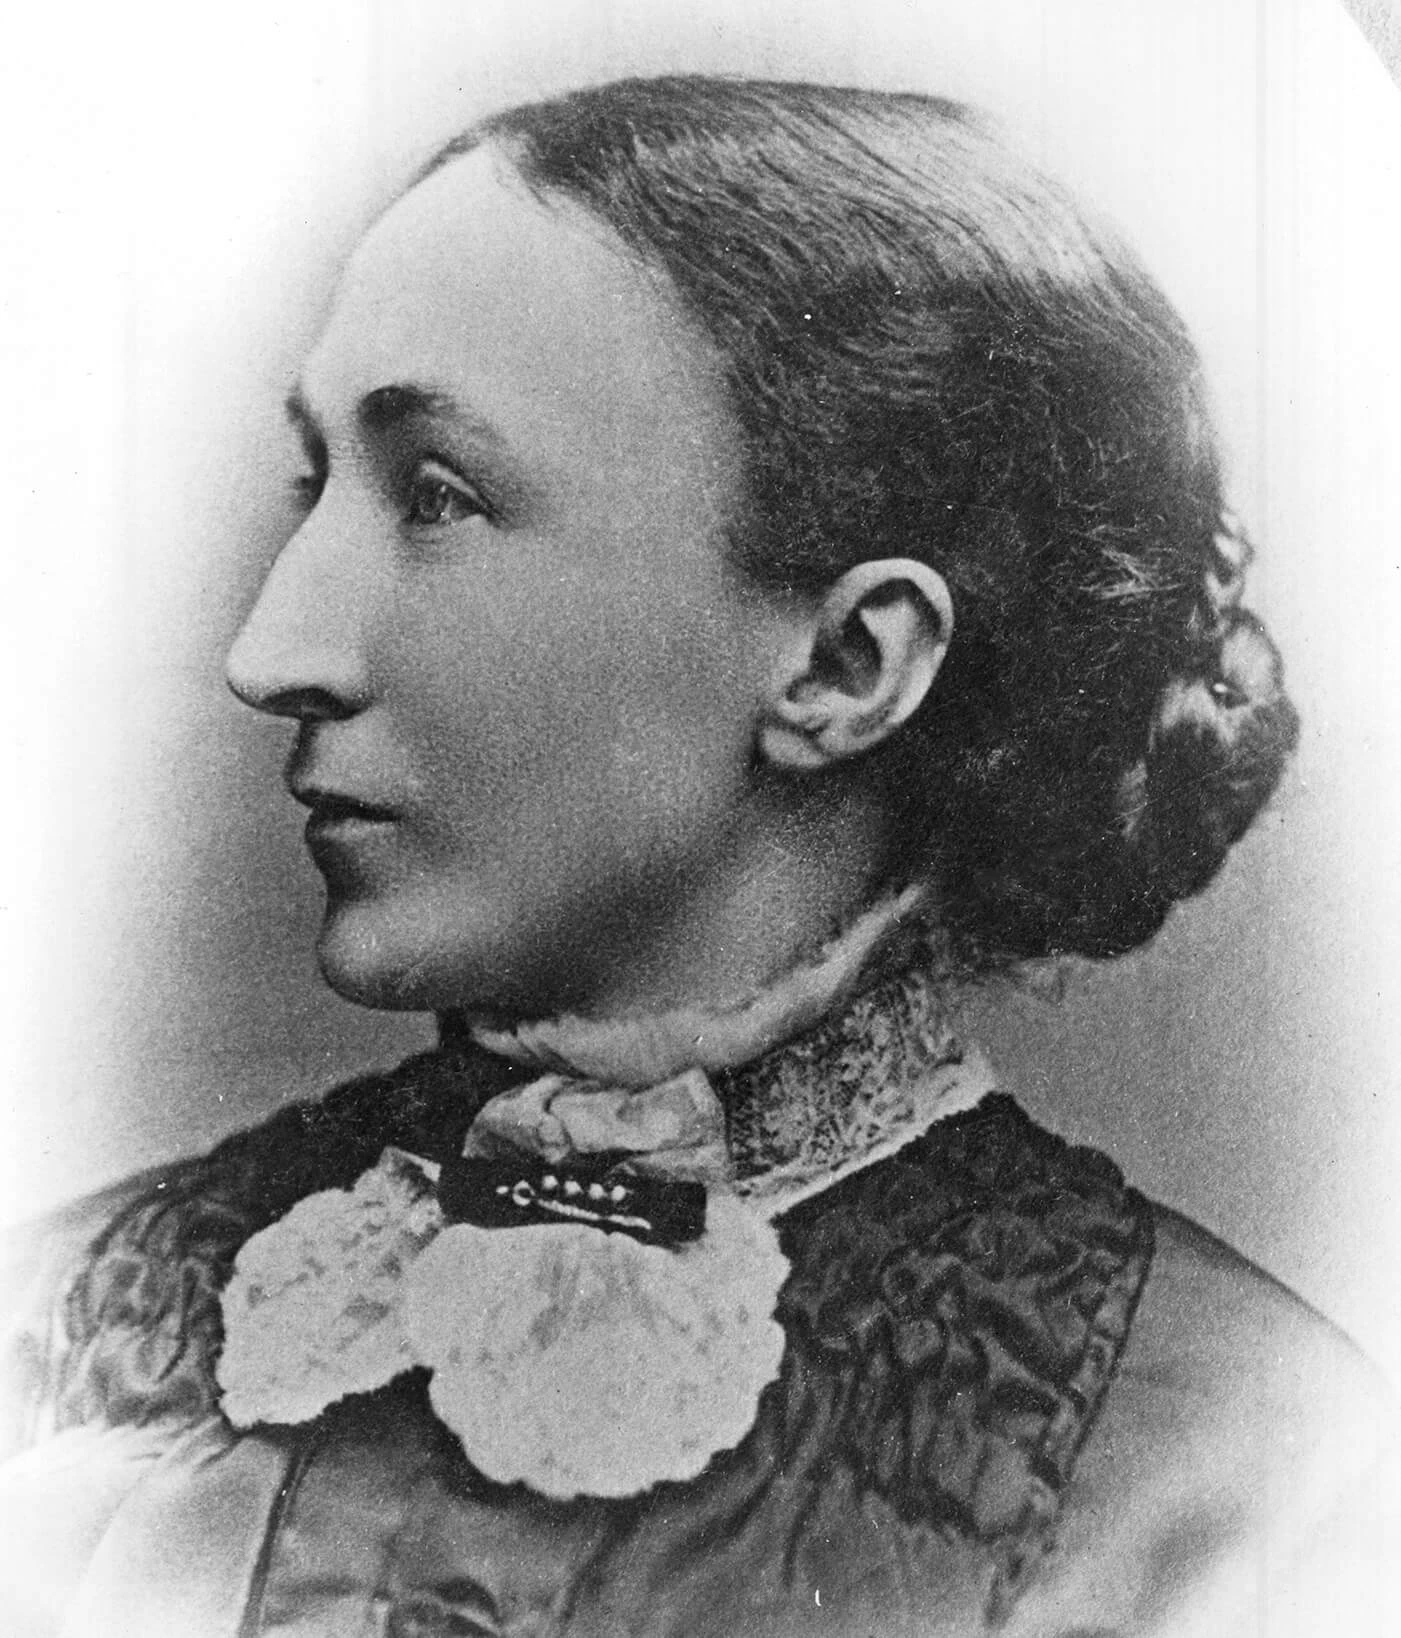 Profile portrait of Eliza Fell, a white woman wearing a high-collared ruffled dress and hair in a low bun.